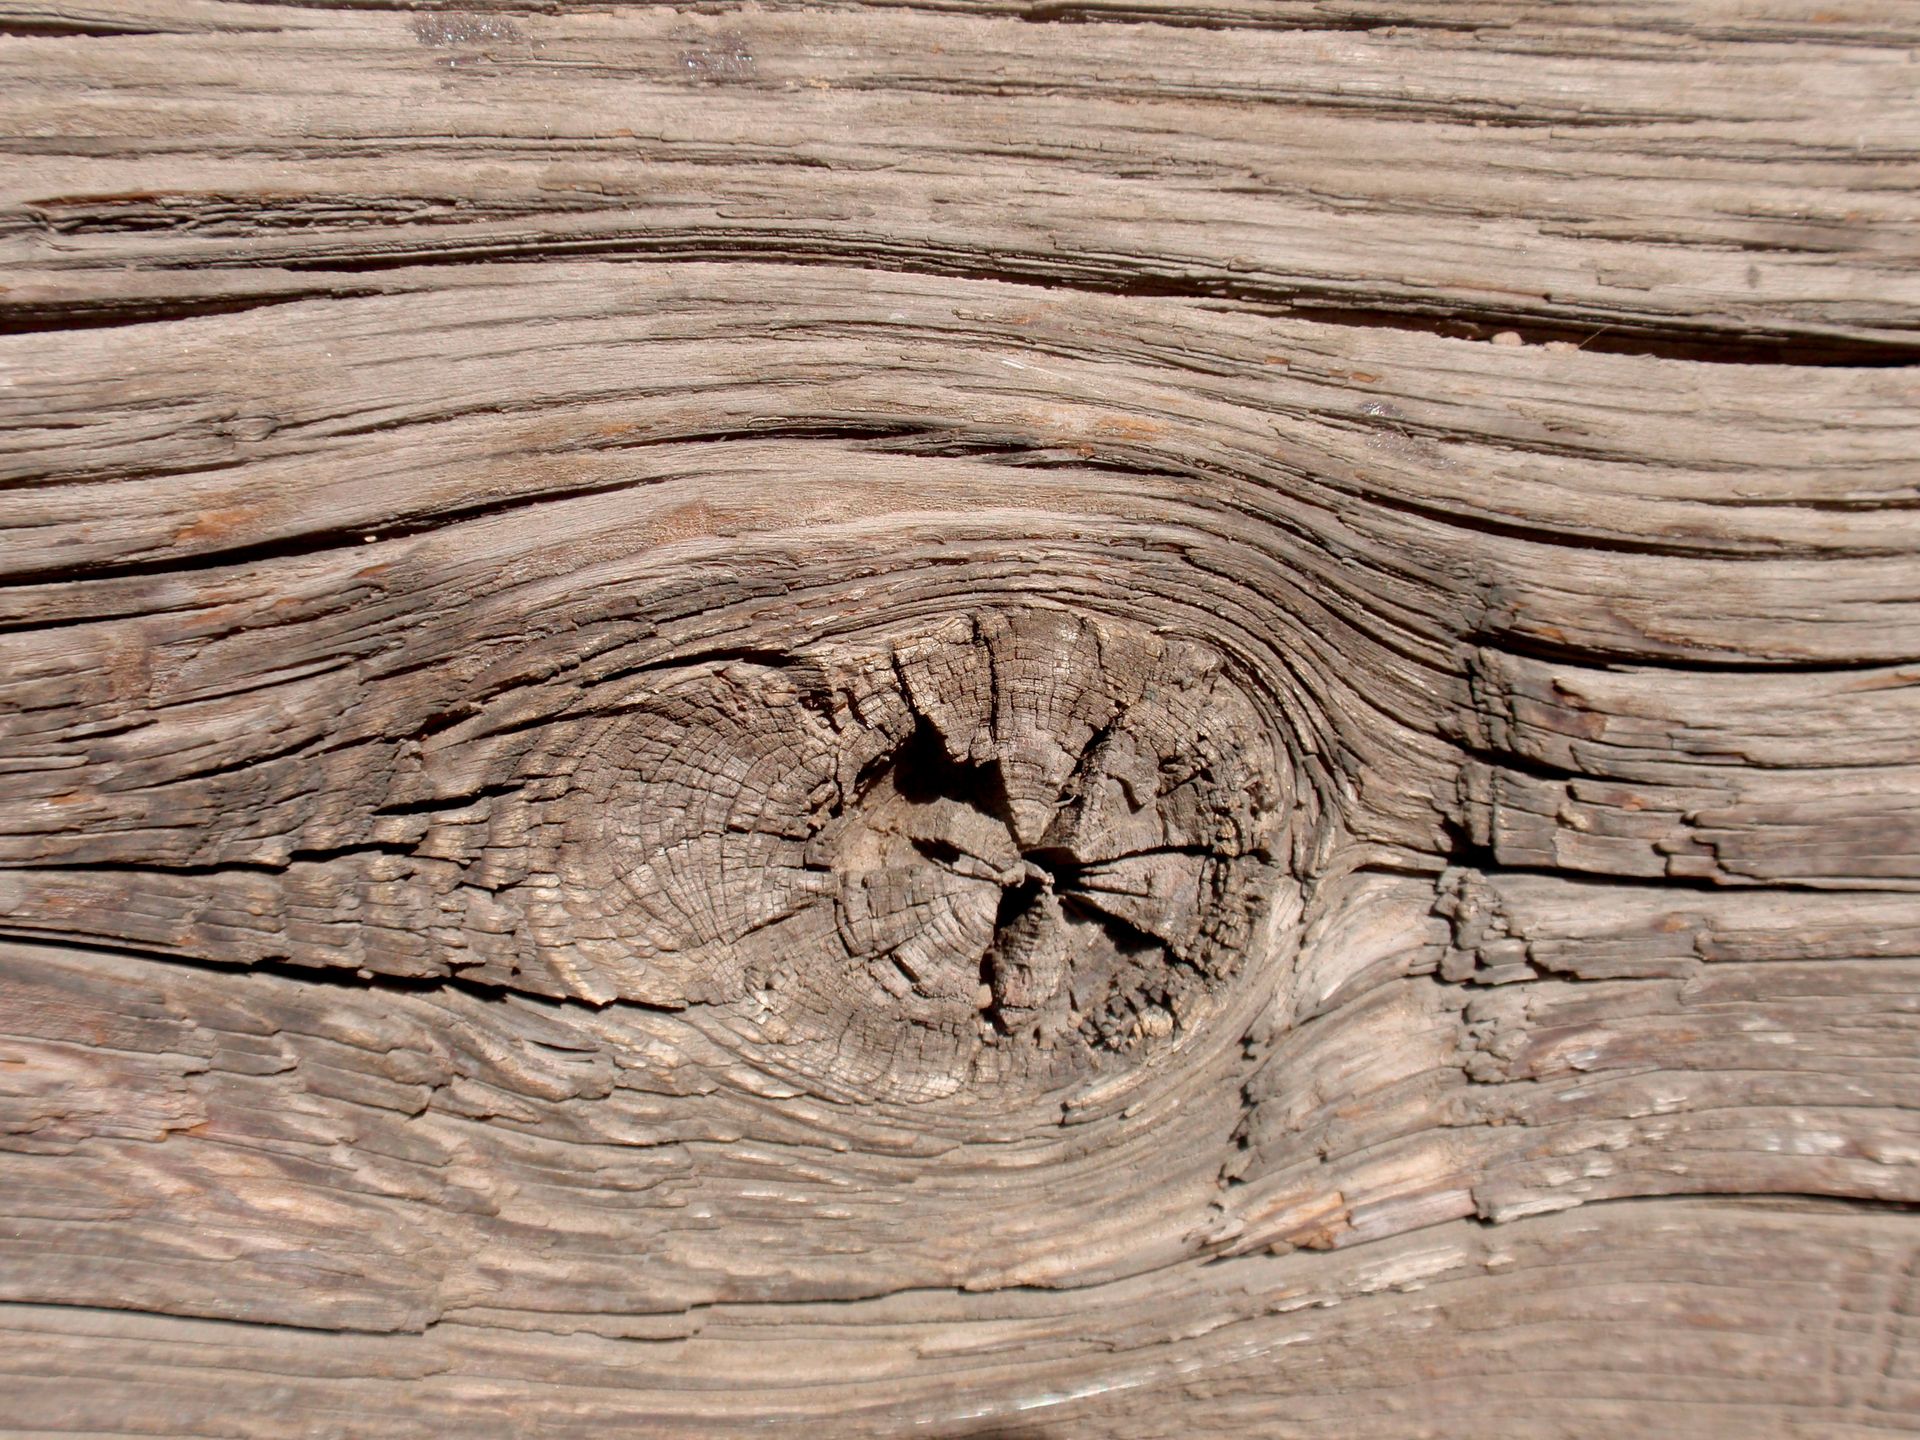 A large knot in a plank of wood.